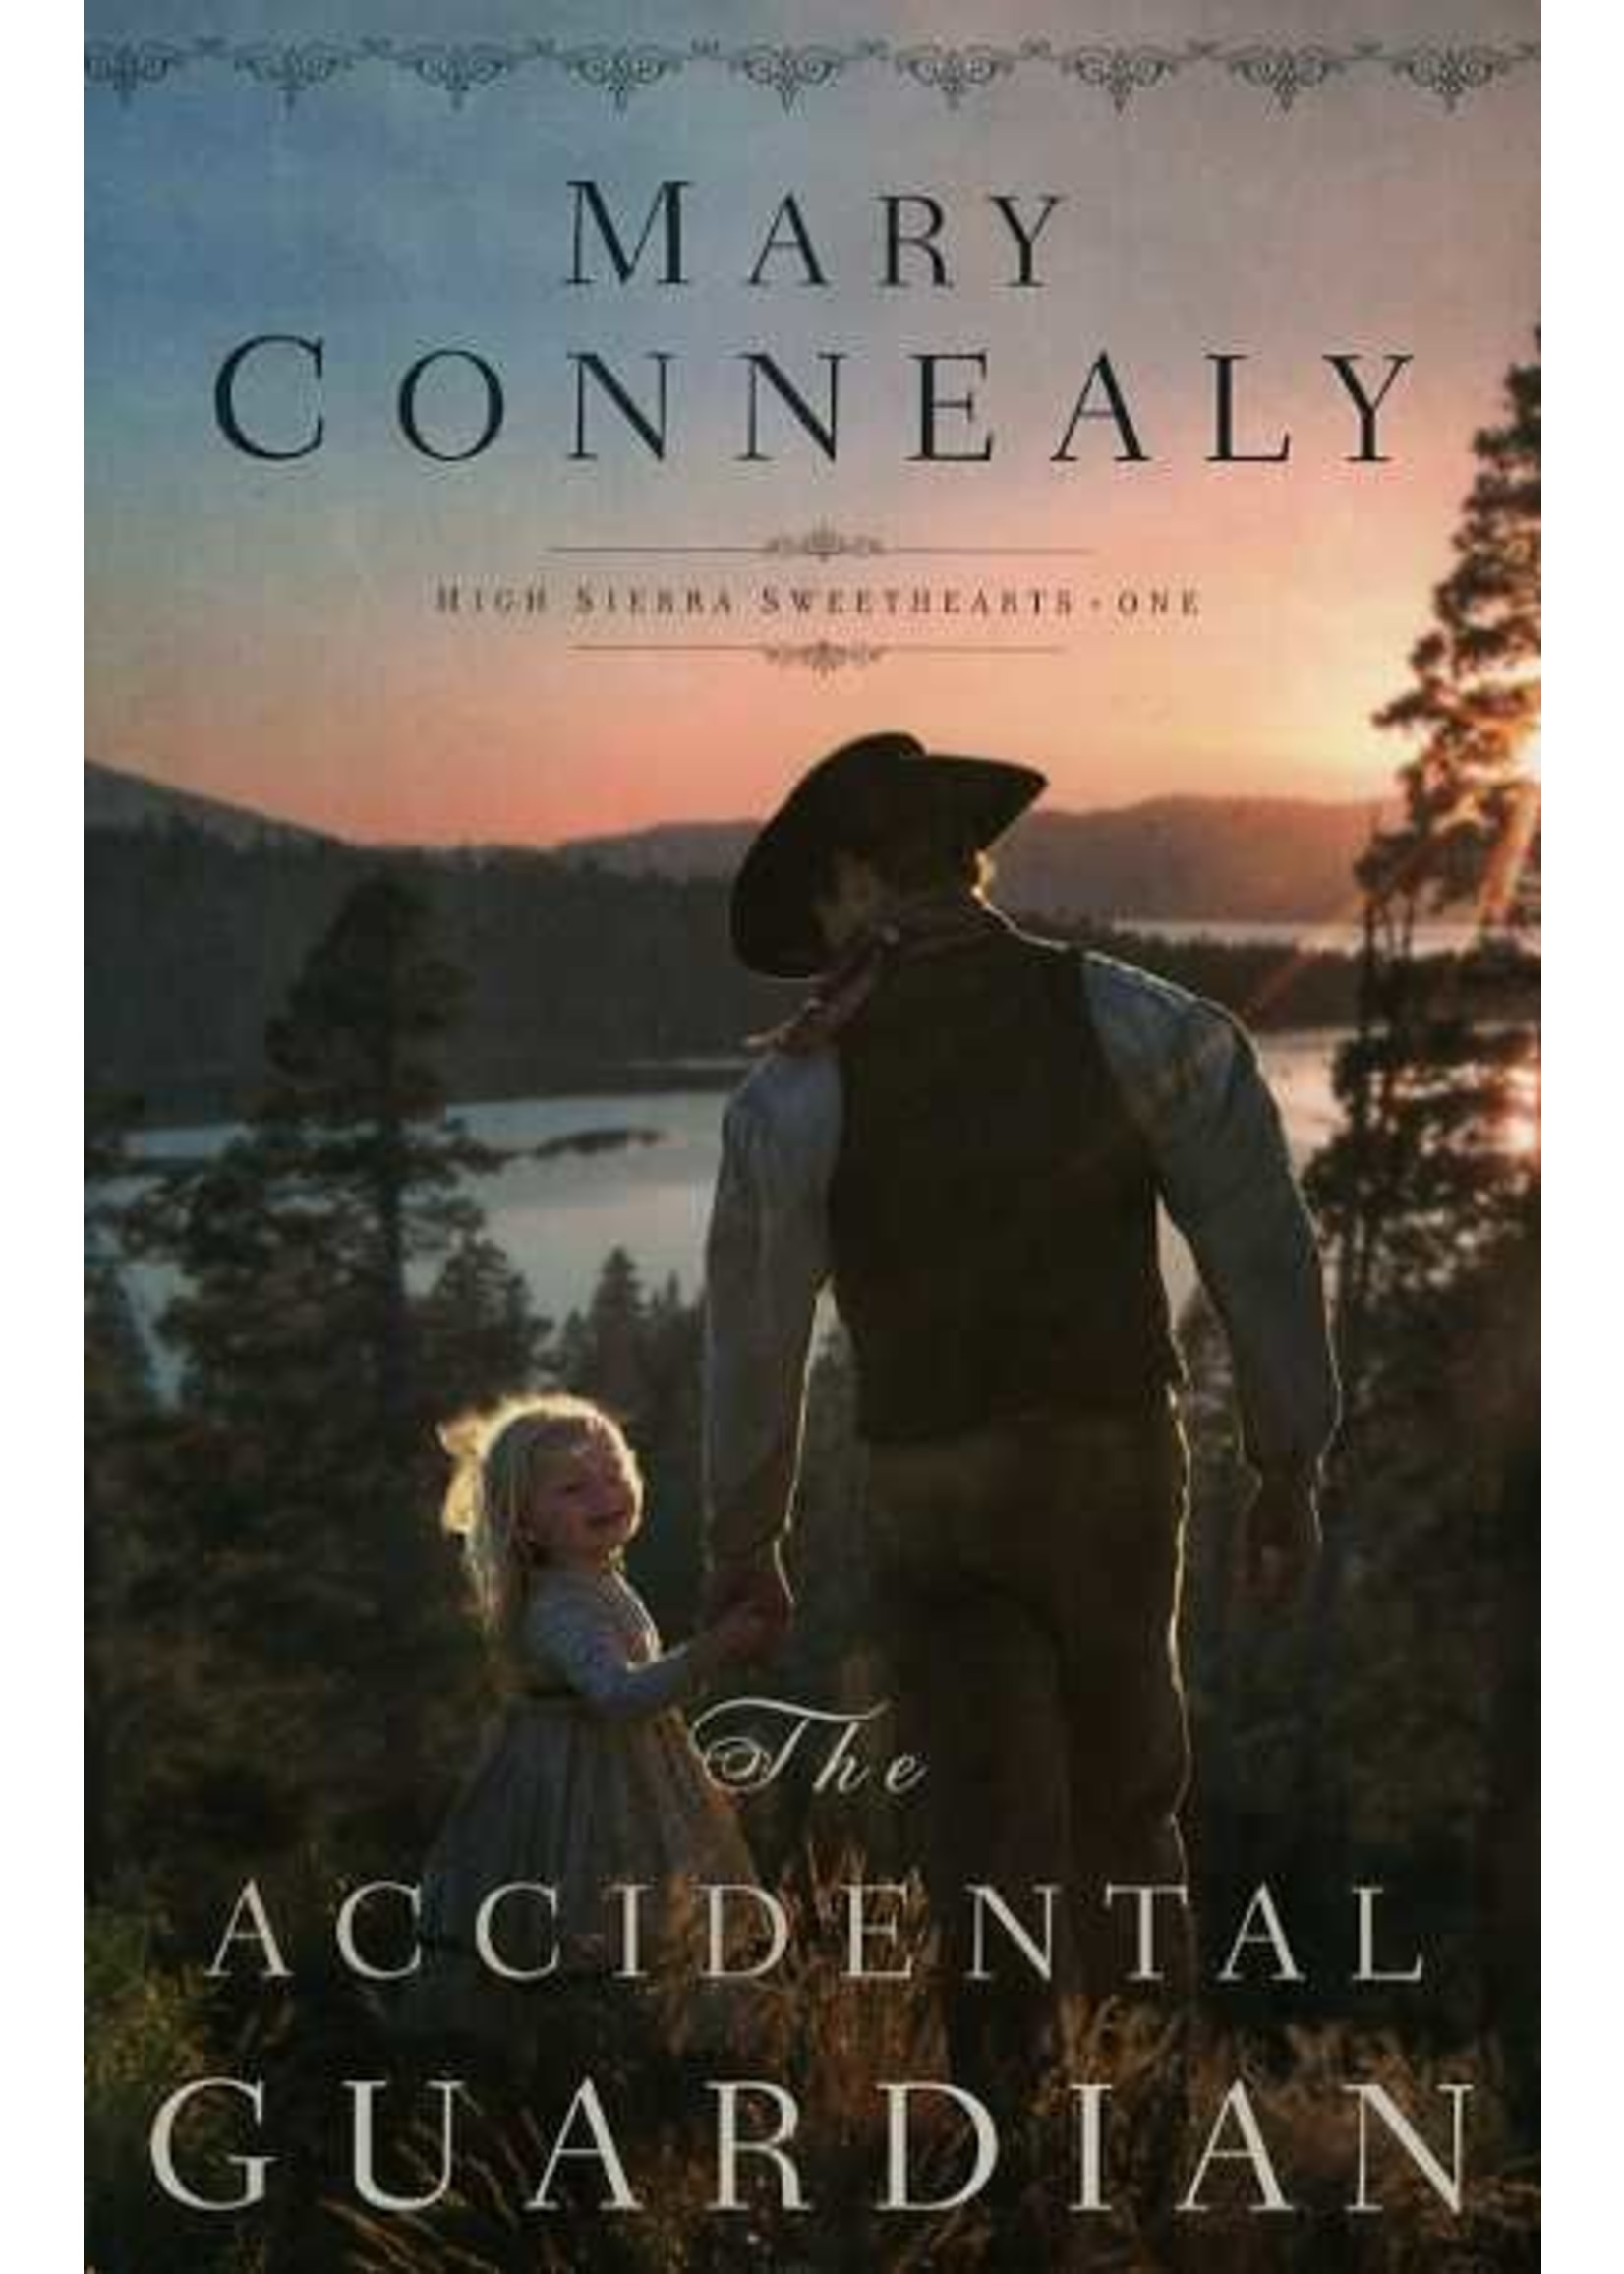 Bethany House The Accidental Guardian (High Sierra Sweethearts 1) - Mary Connealy